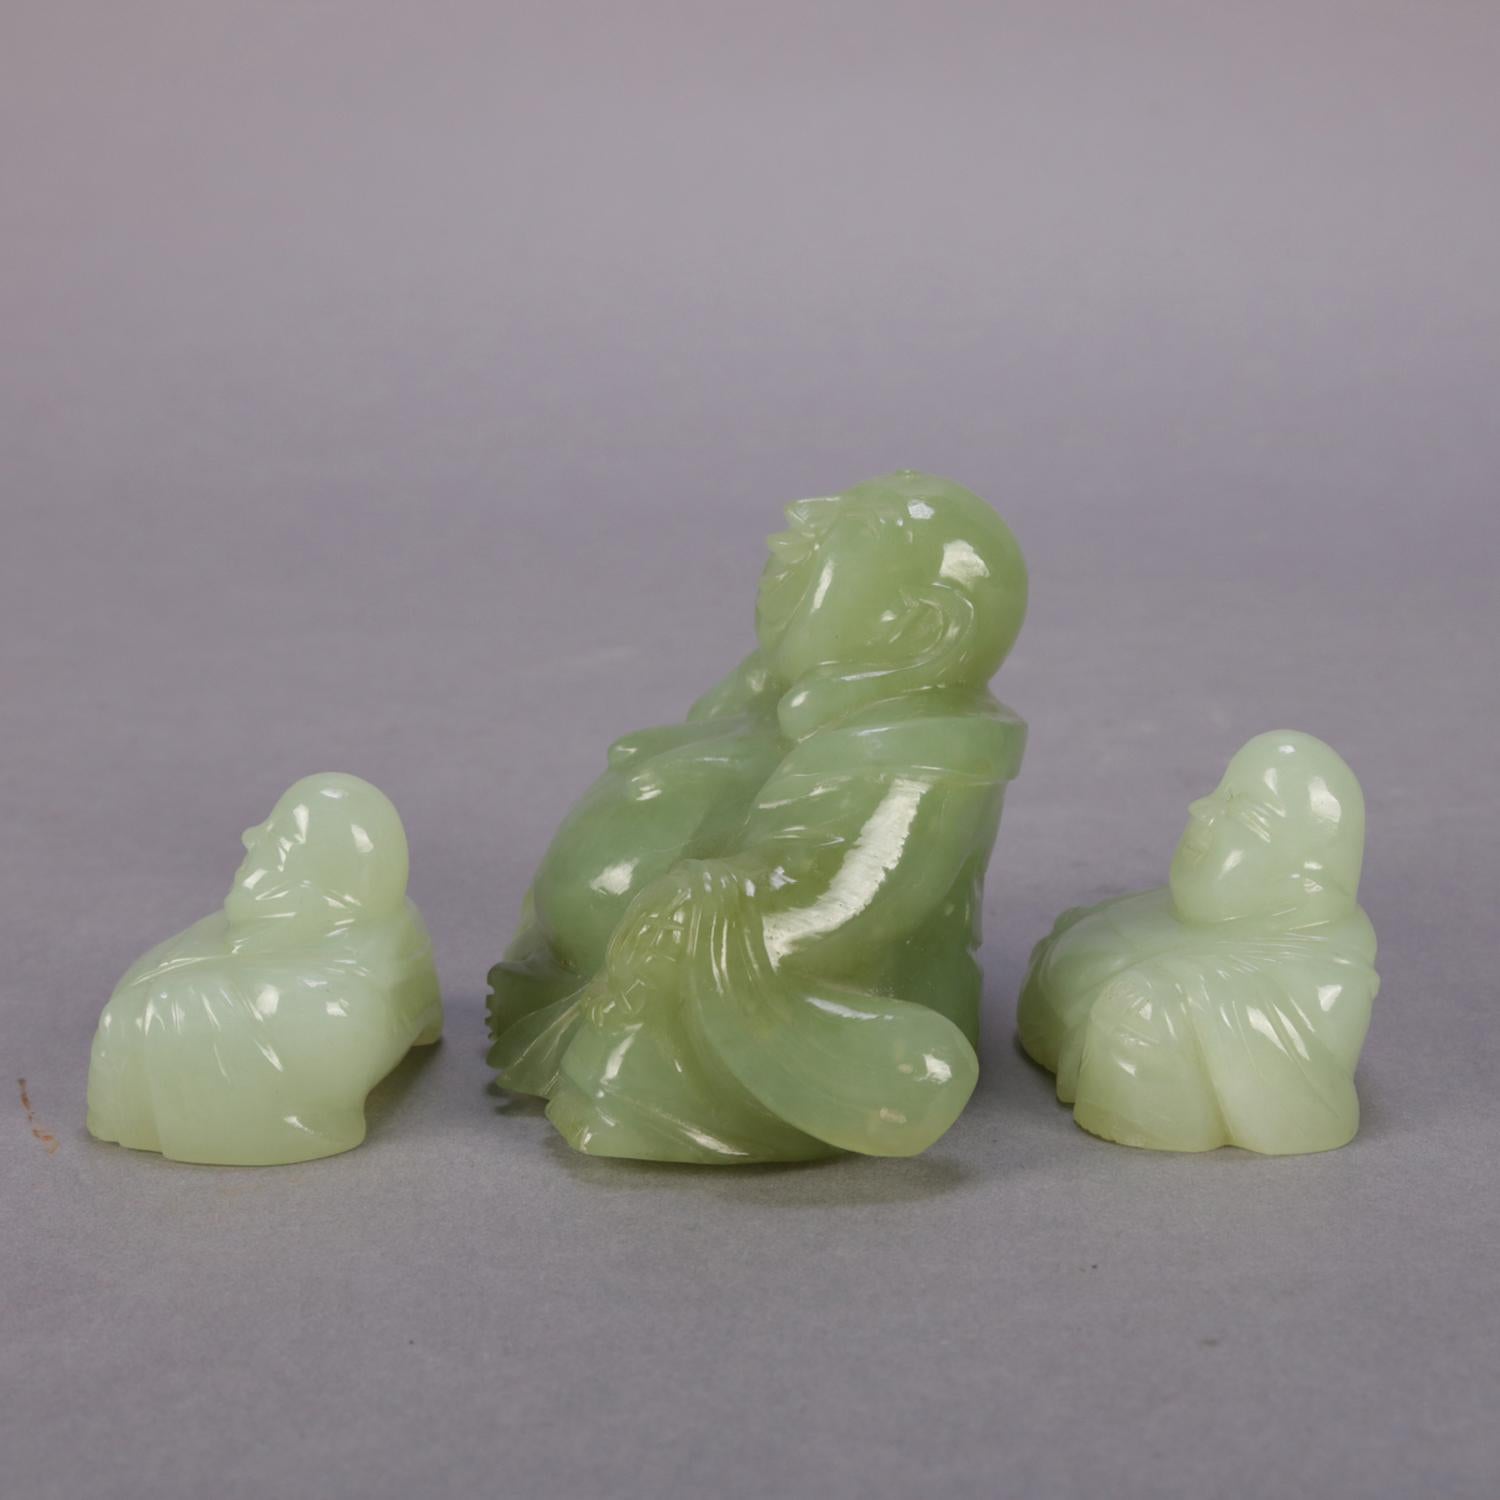 Hand-Carved Three Chinese Carved Jade Figural Sculptures of Laughing Buddha, Budai